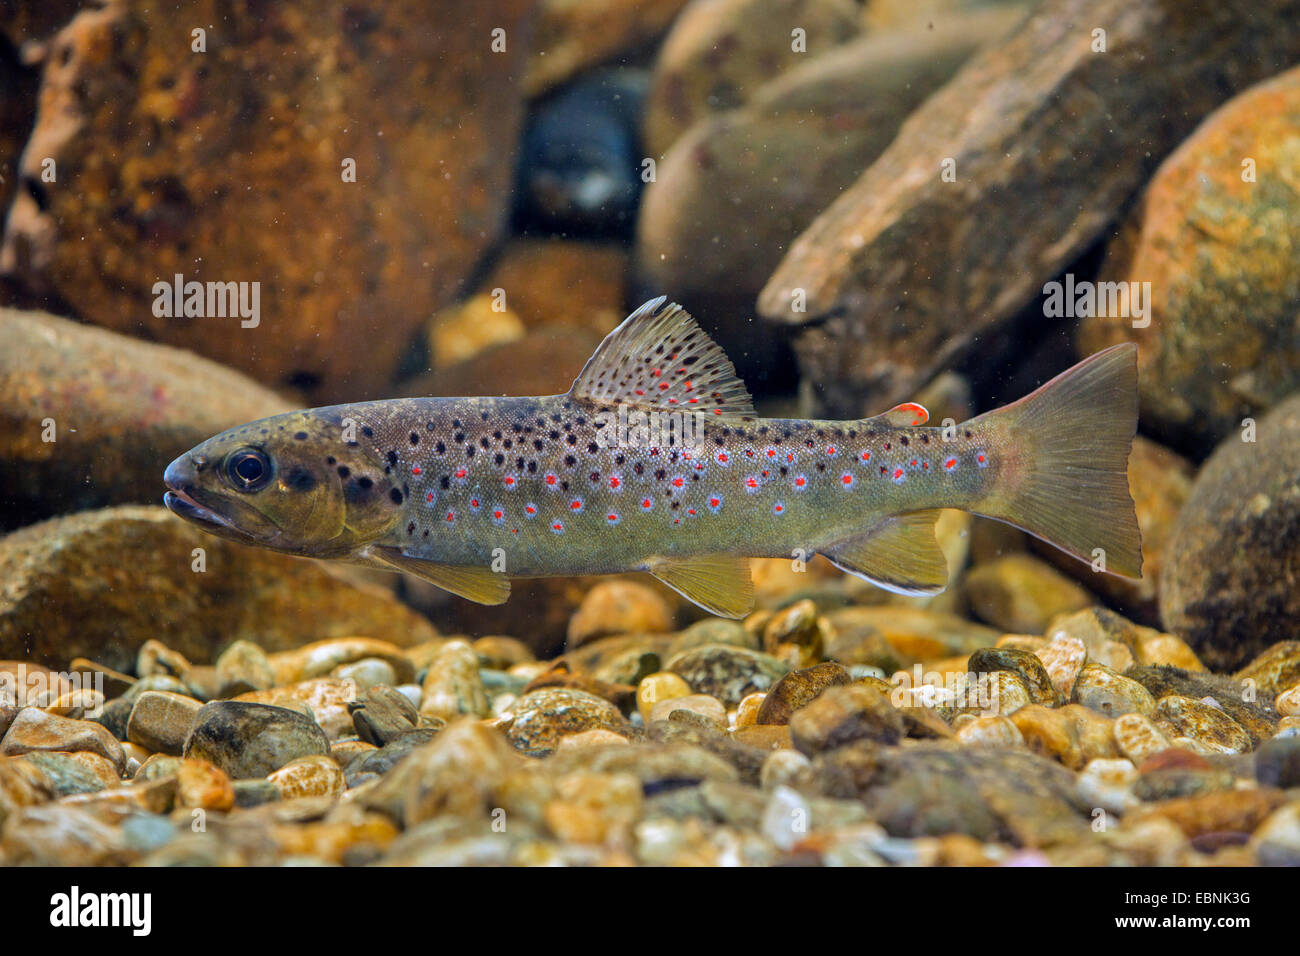 brown trout, river trout, brook trout (Salmo trutta fario), from nutrient-poor creek, Germany Stock Photo